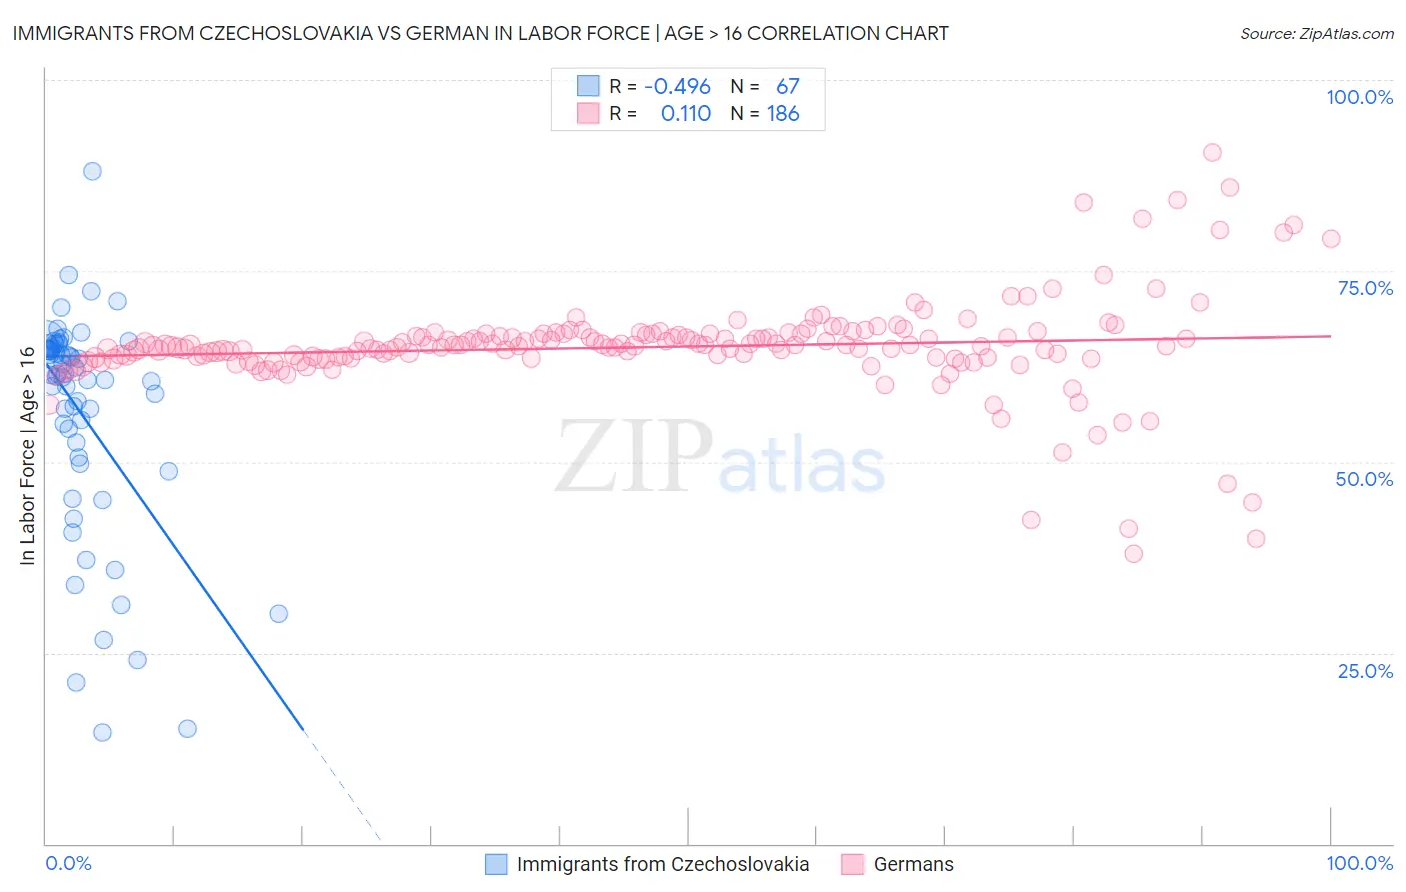 Immigrants from Czechoslovakia vs German In Labor Force | Age > 16